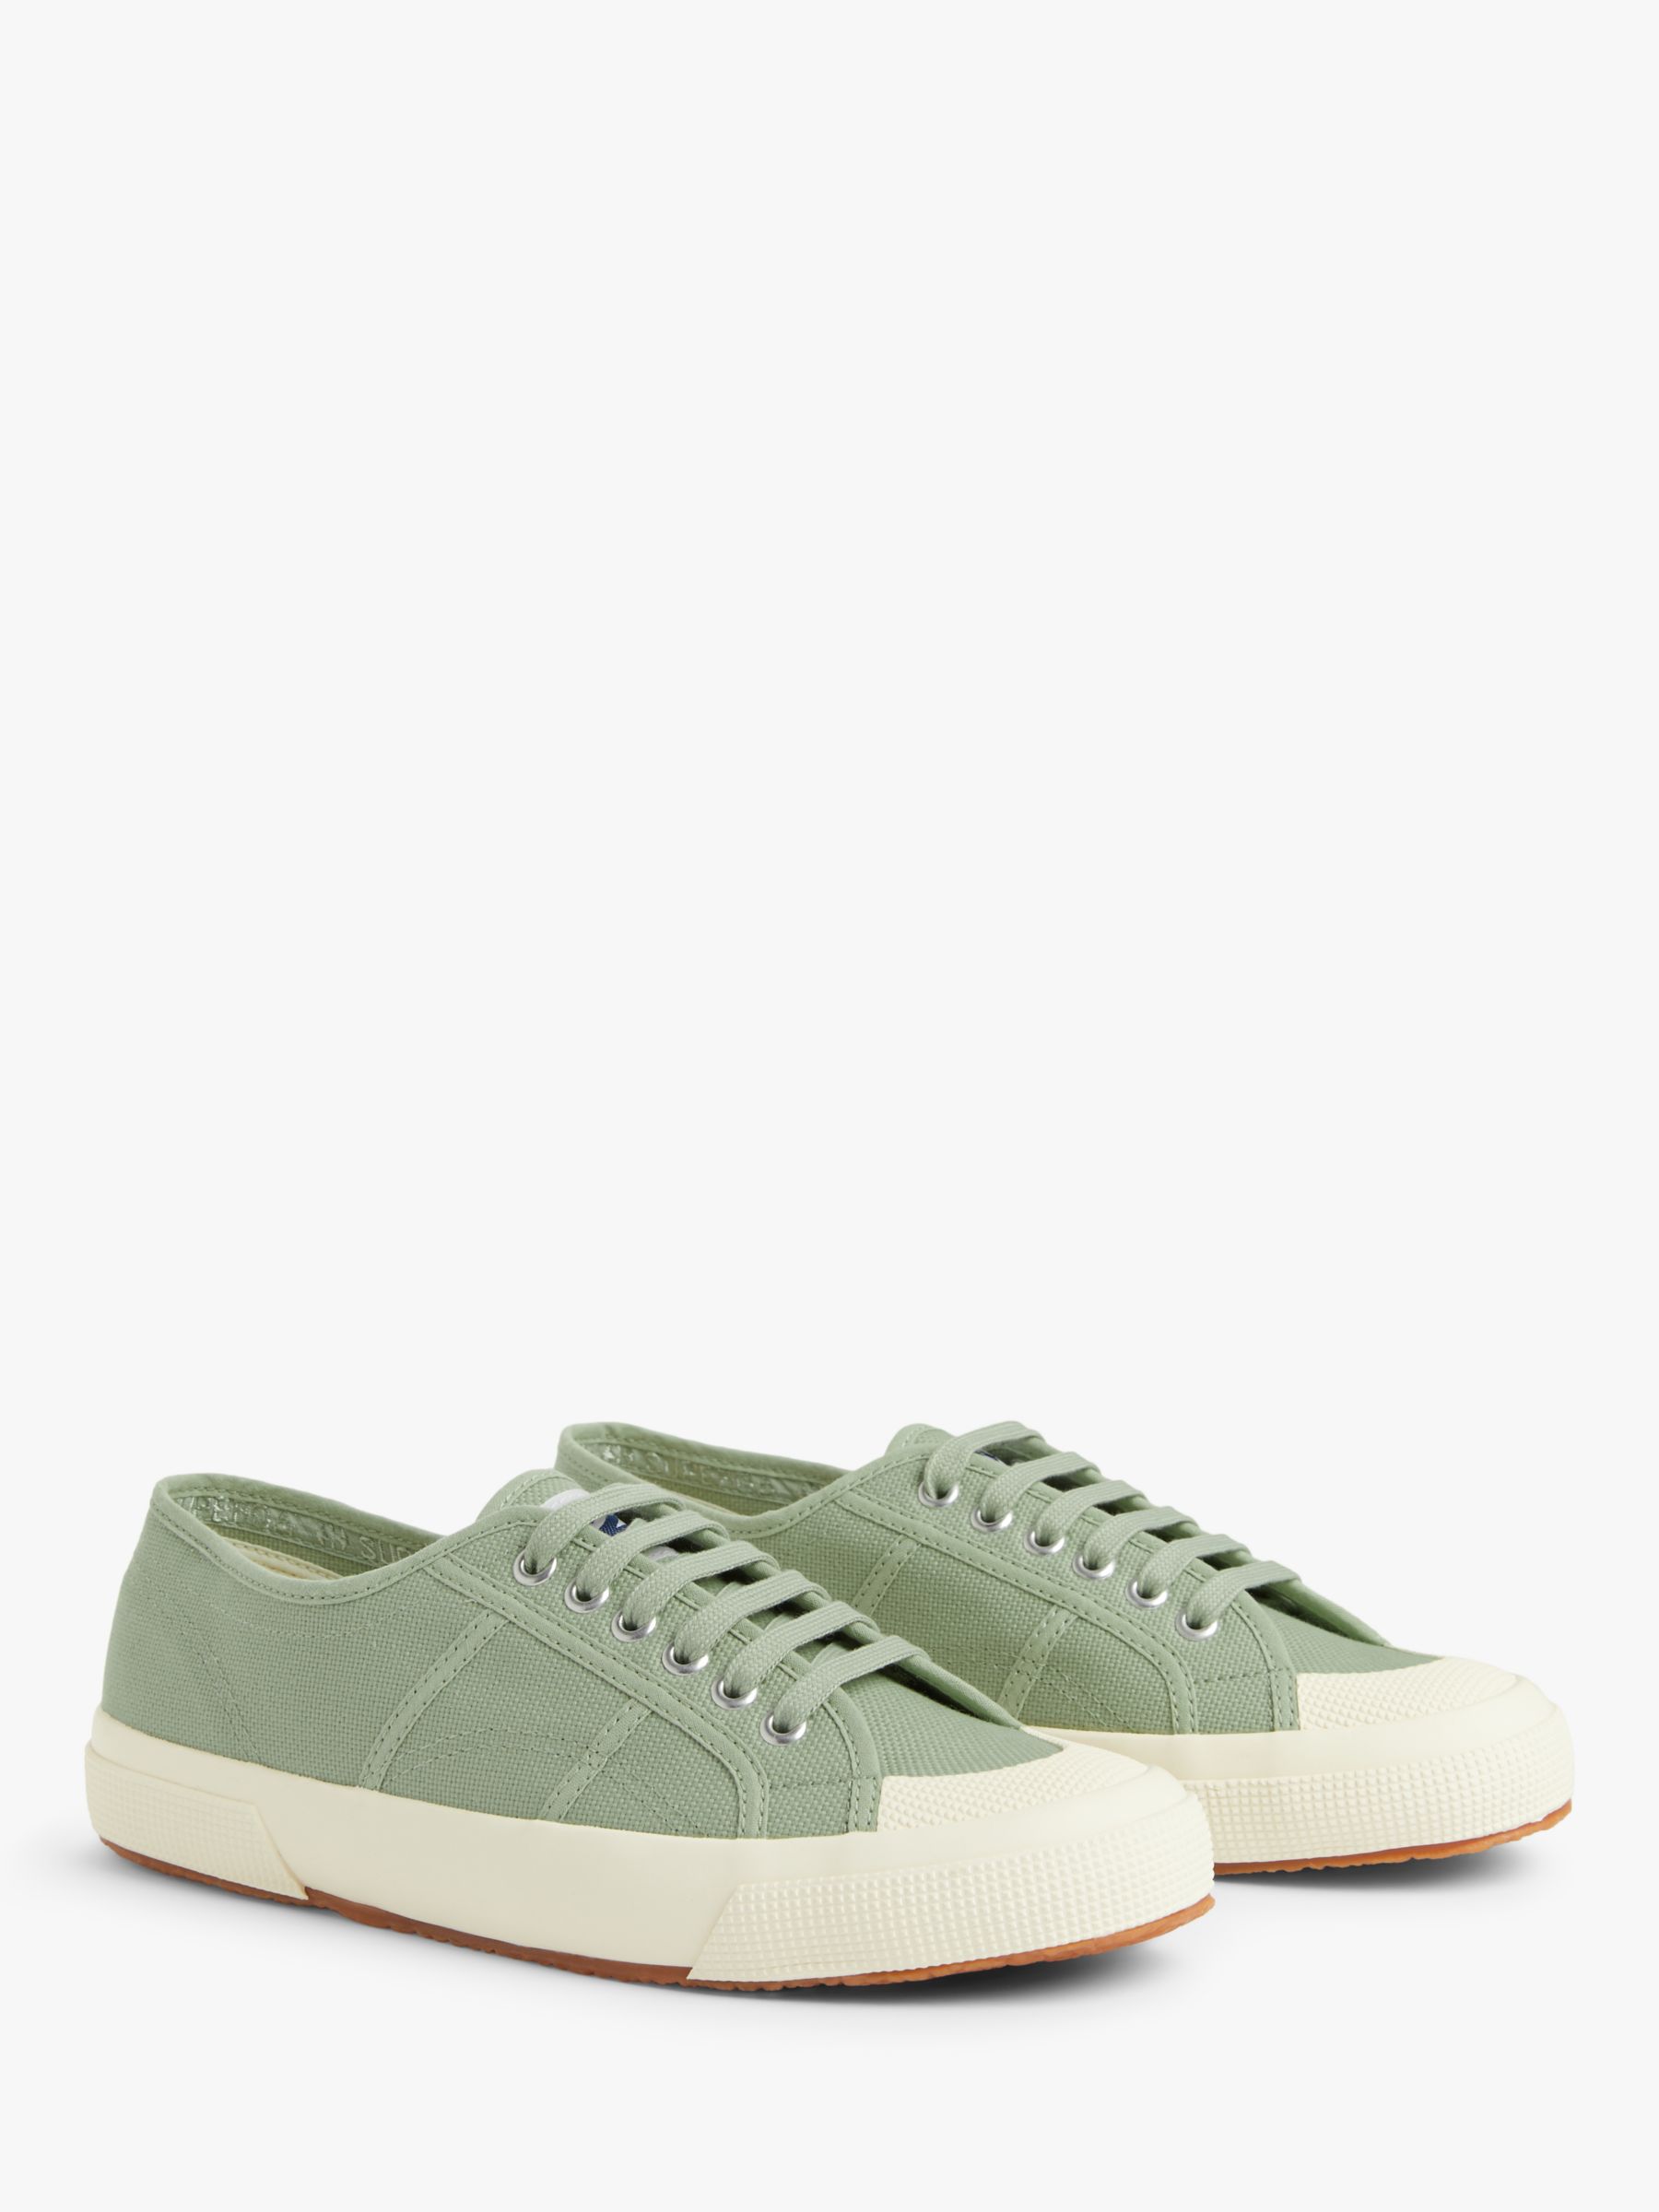 sage green trainers